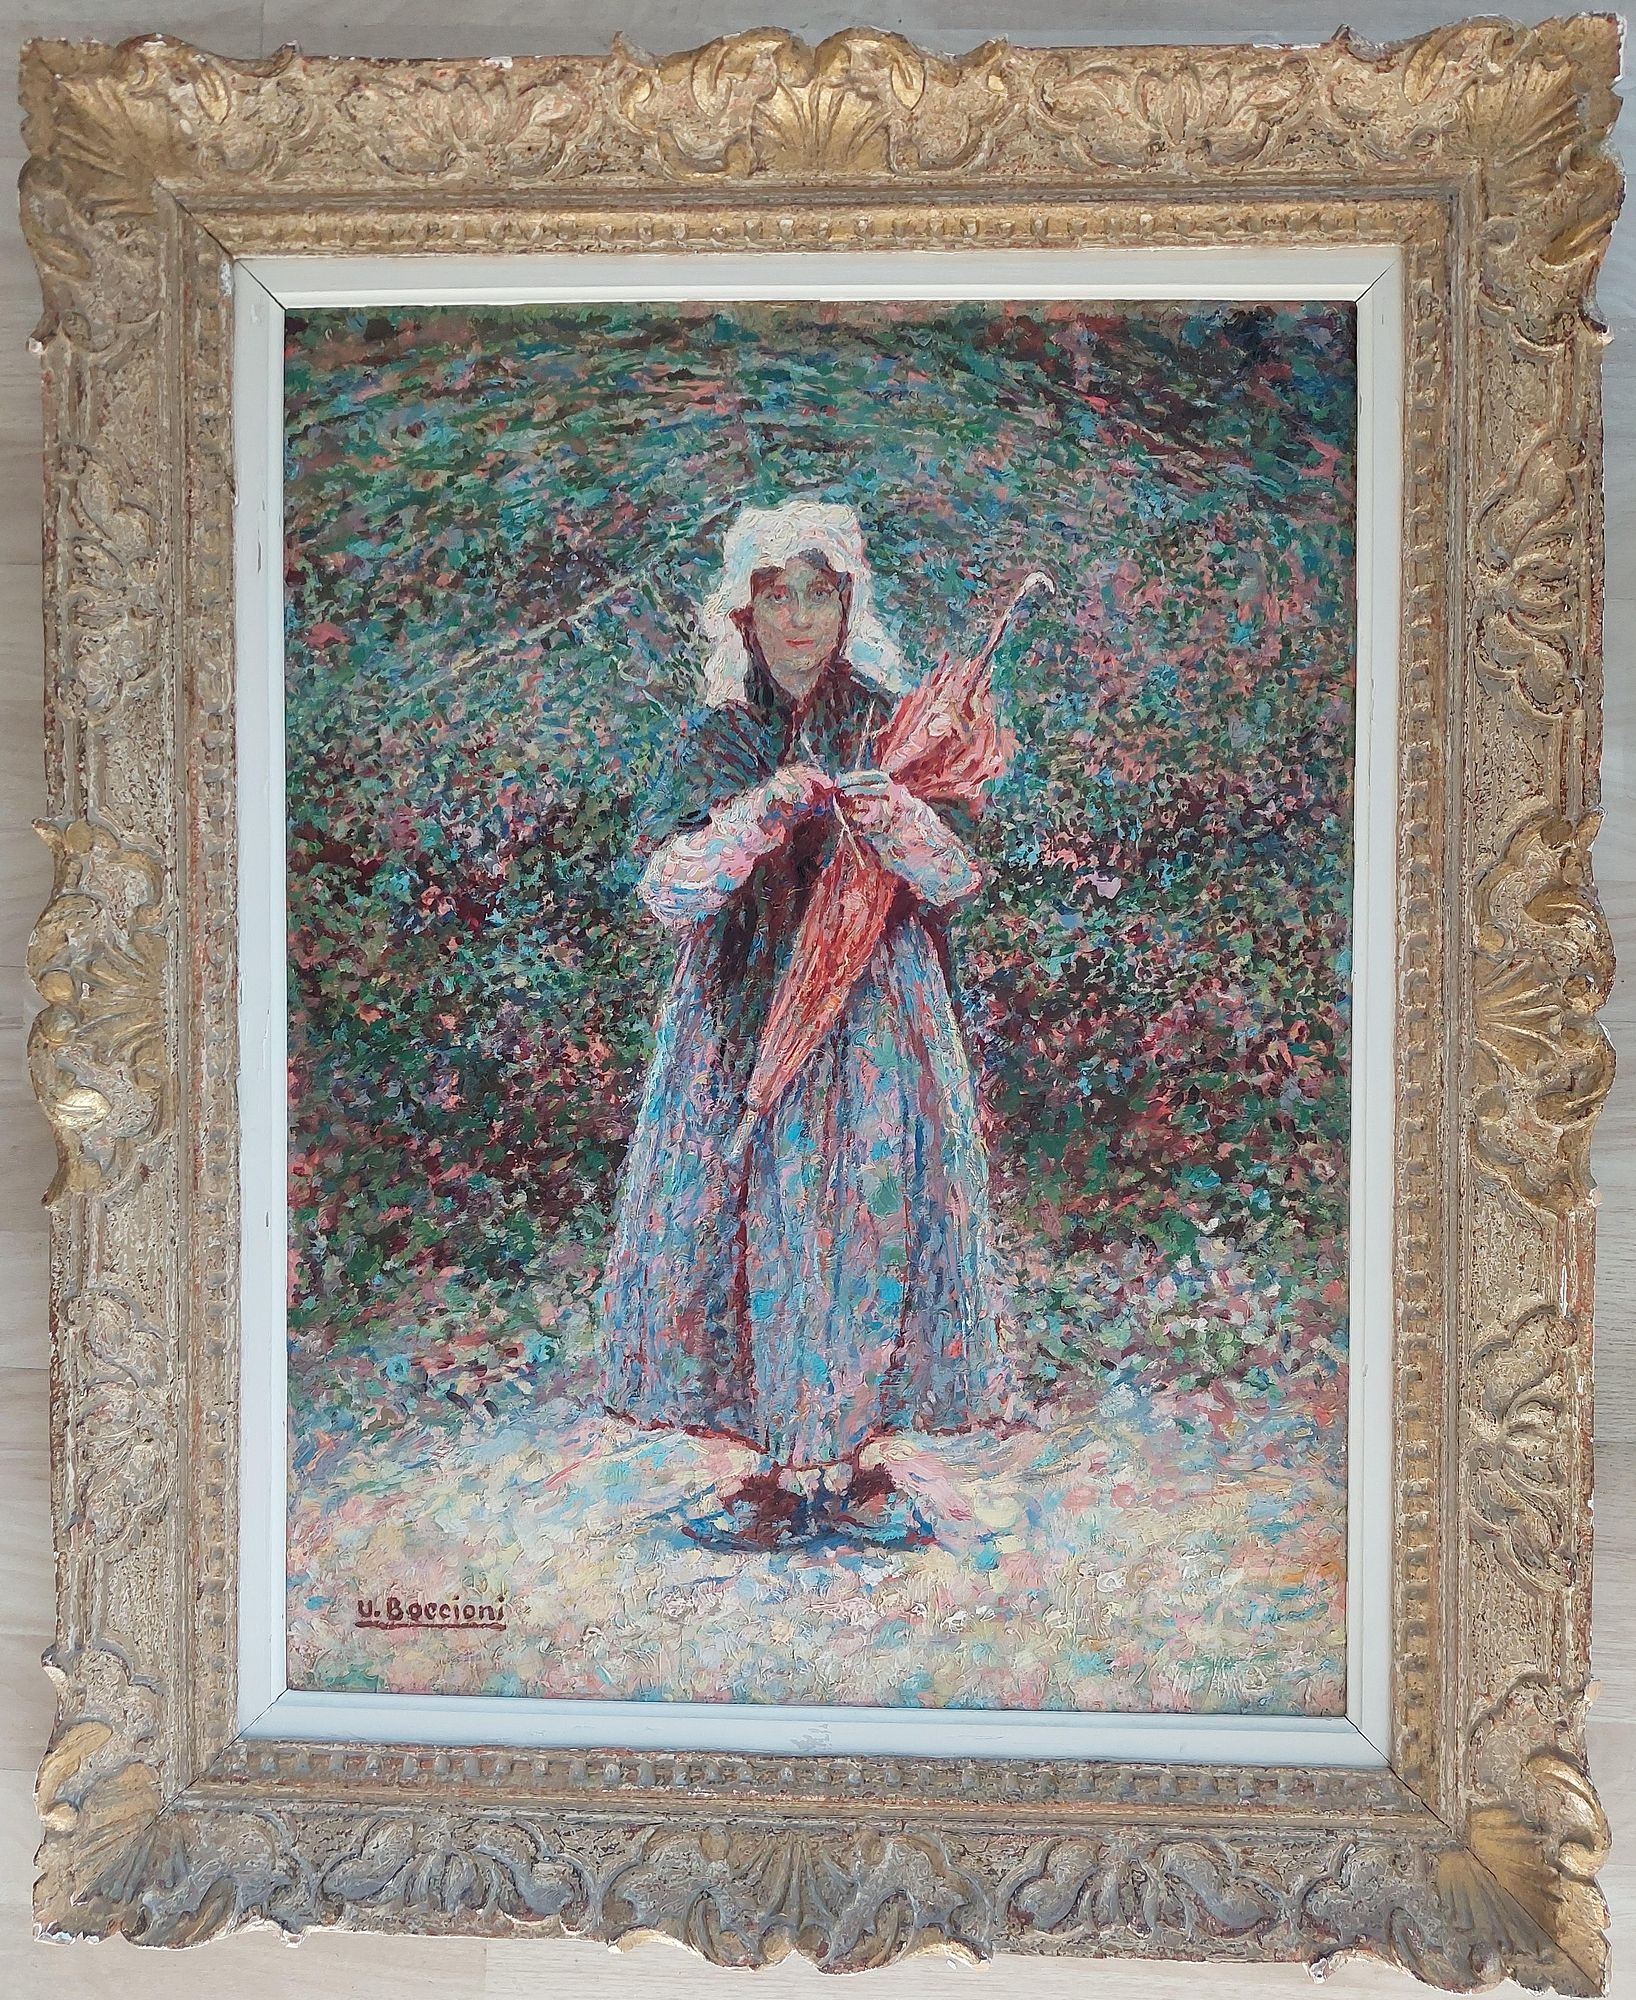 PORTRAIT OF GIRL OIL PAINTING by Umberto Boccioni, early 20th century